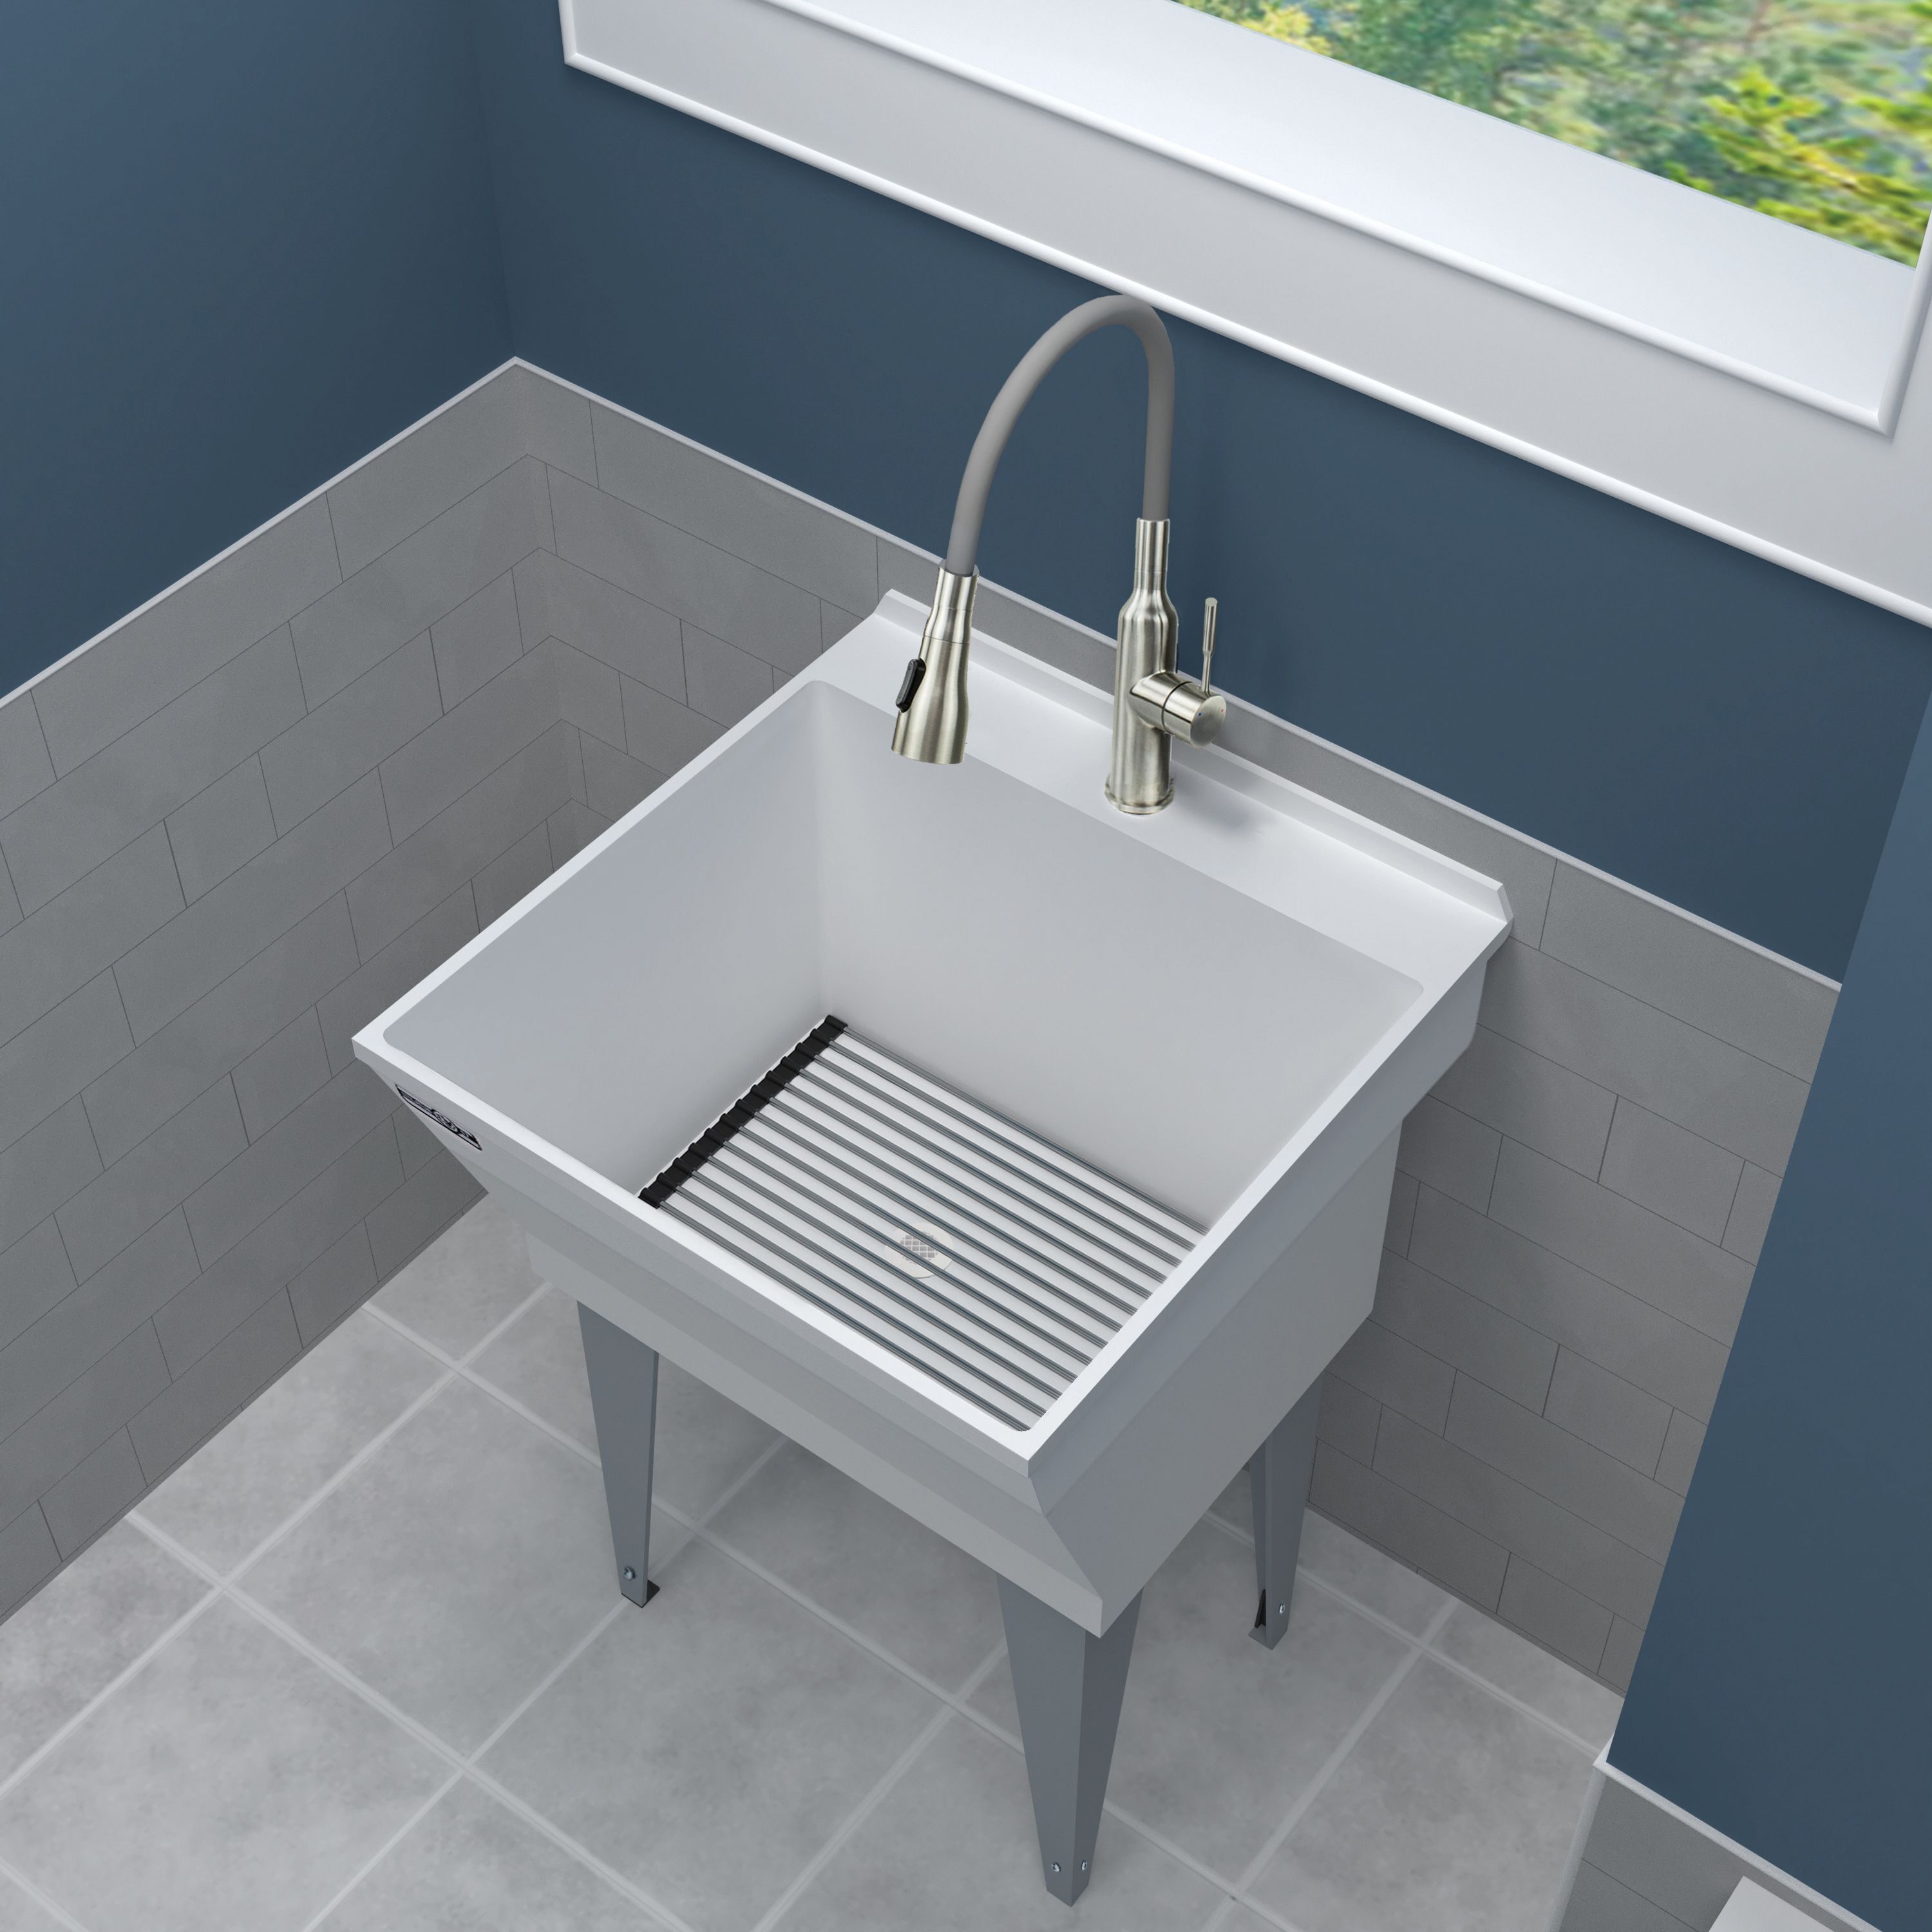 ABS plastic Utility Sinks at